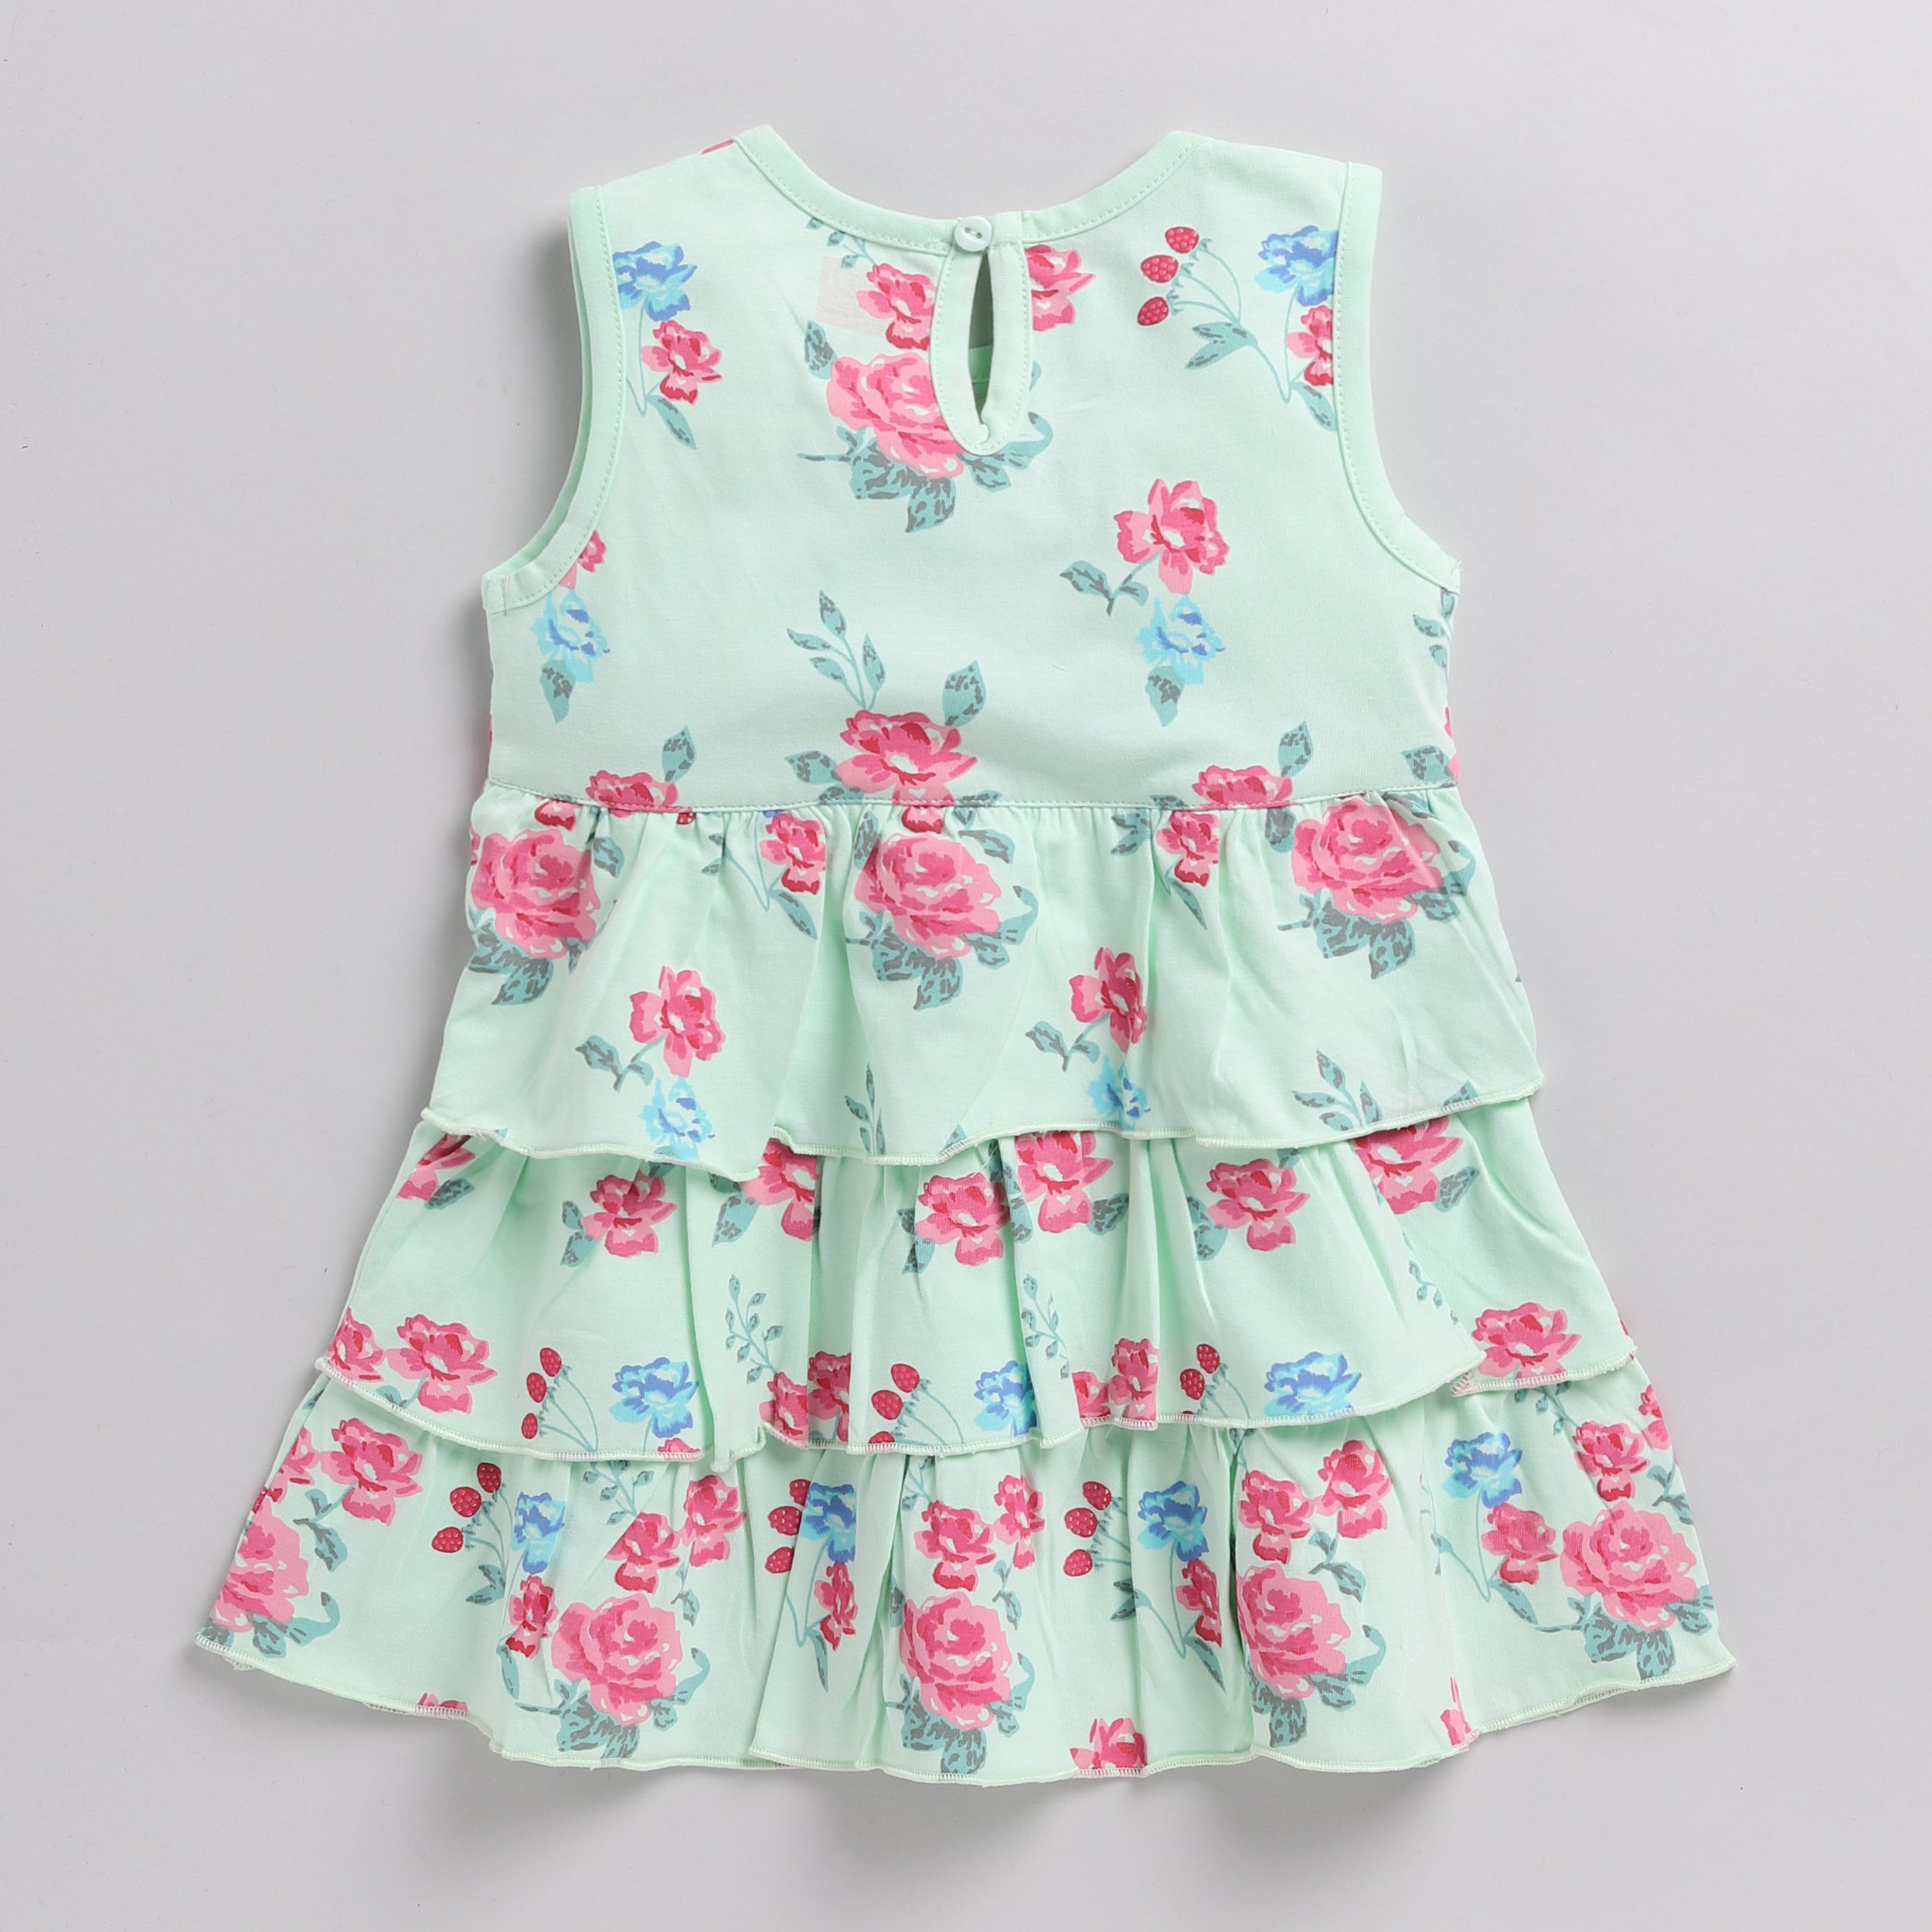 Snuggly Monkey Girls Floral Print Frock With Shrug